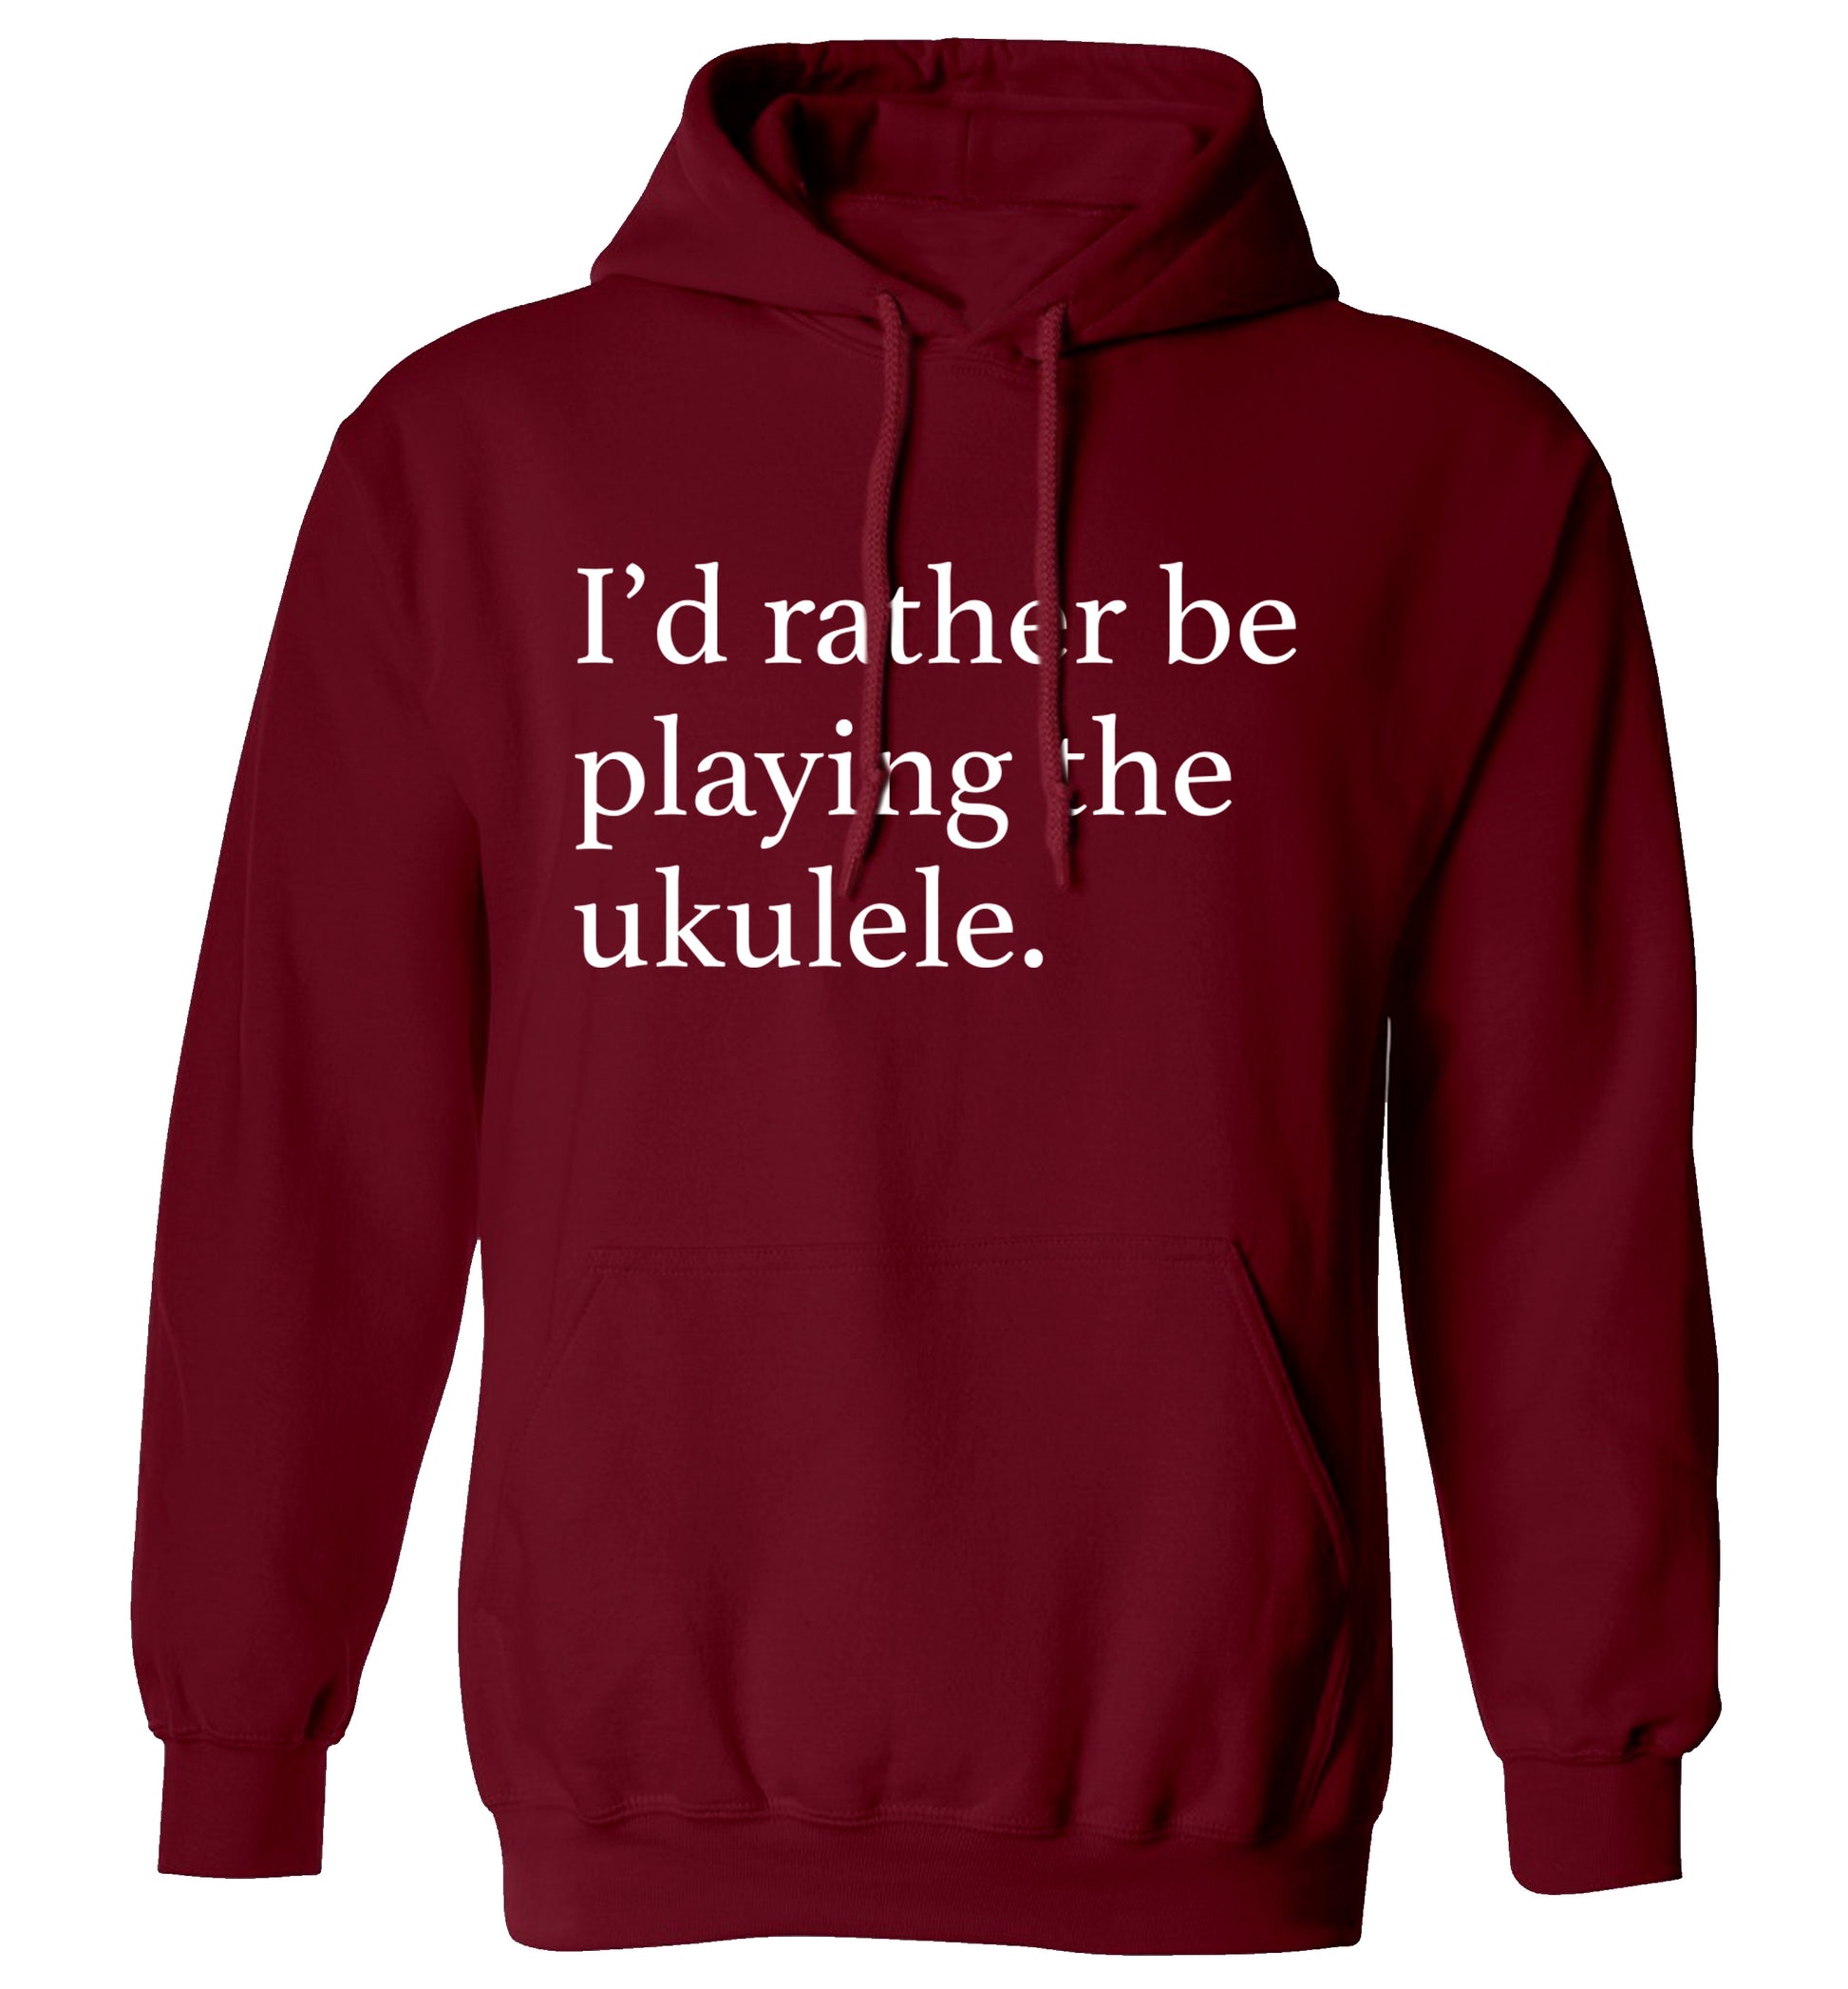 I'd rather by playing the ukulele adults unisex maroon hoodie 2XL